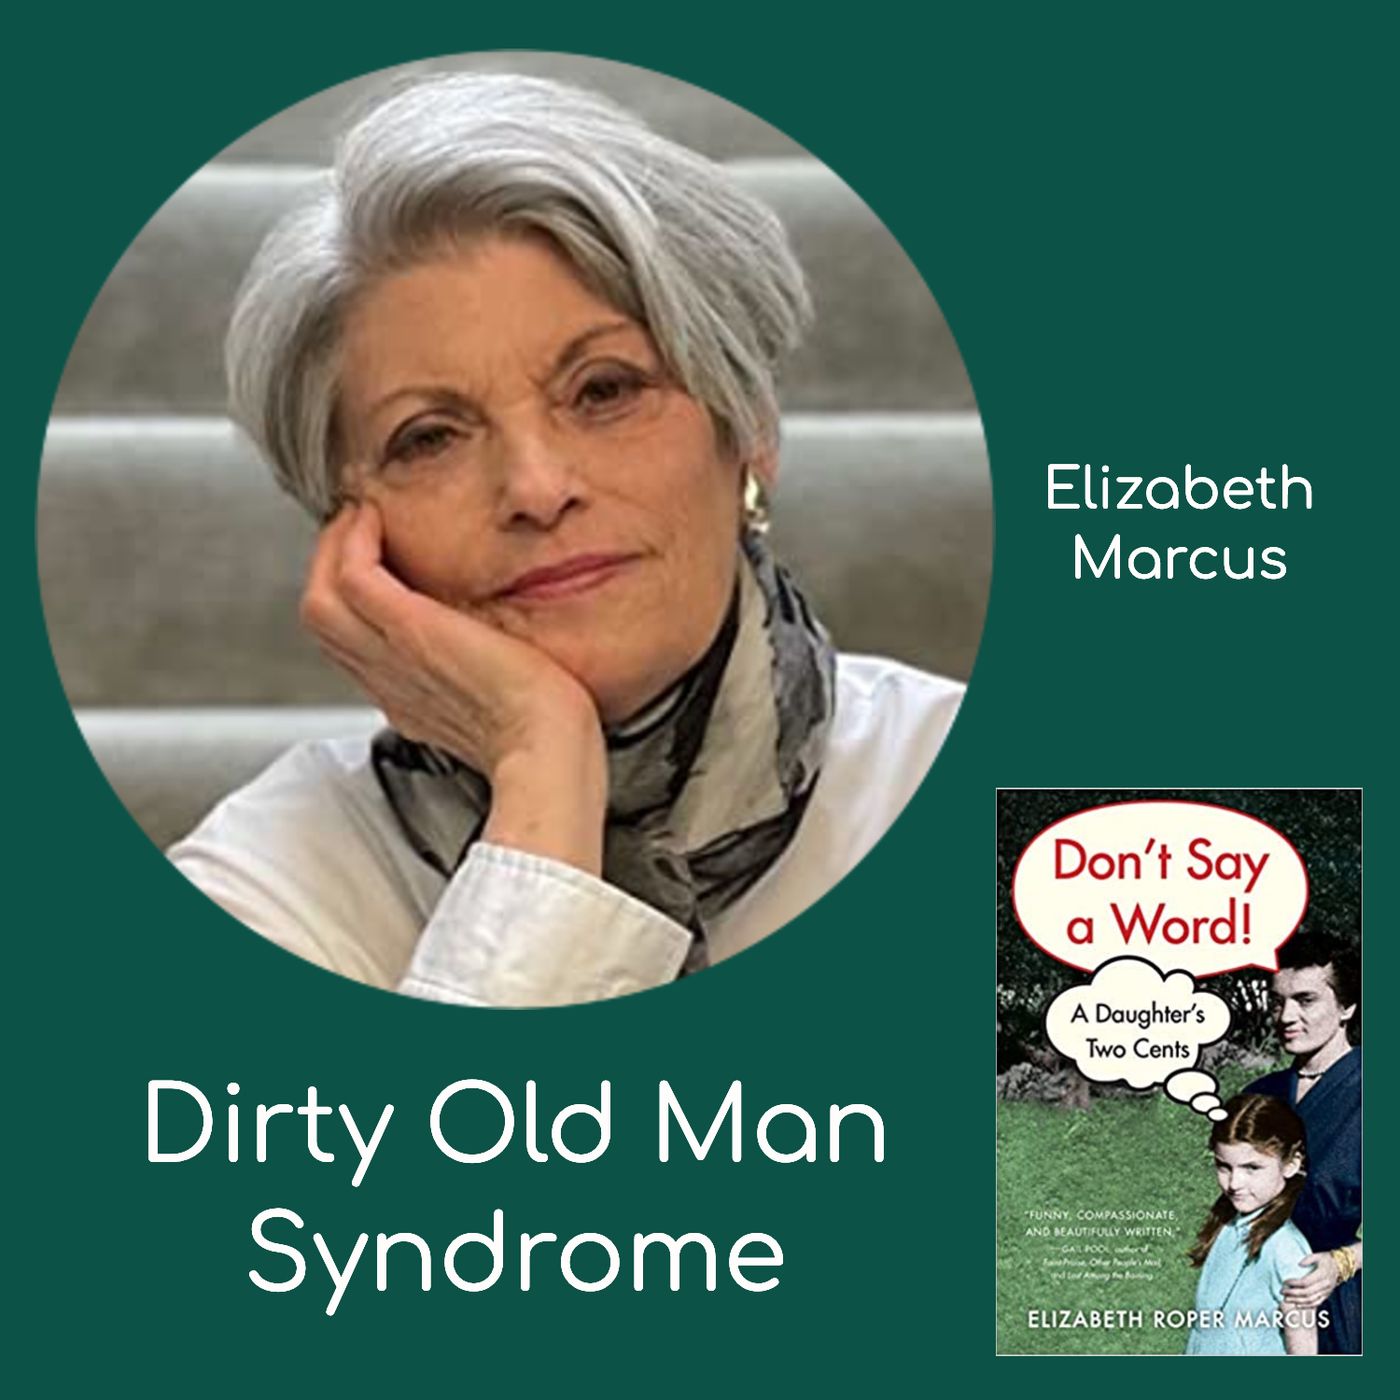 Dirty Old Man Syndrome